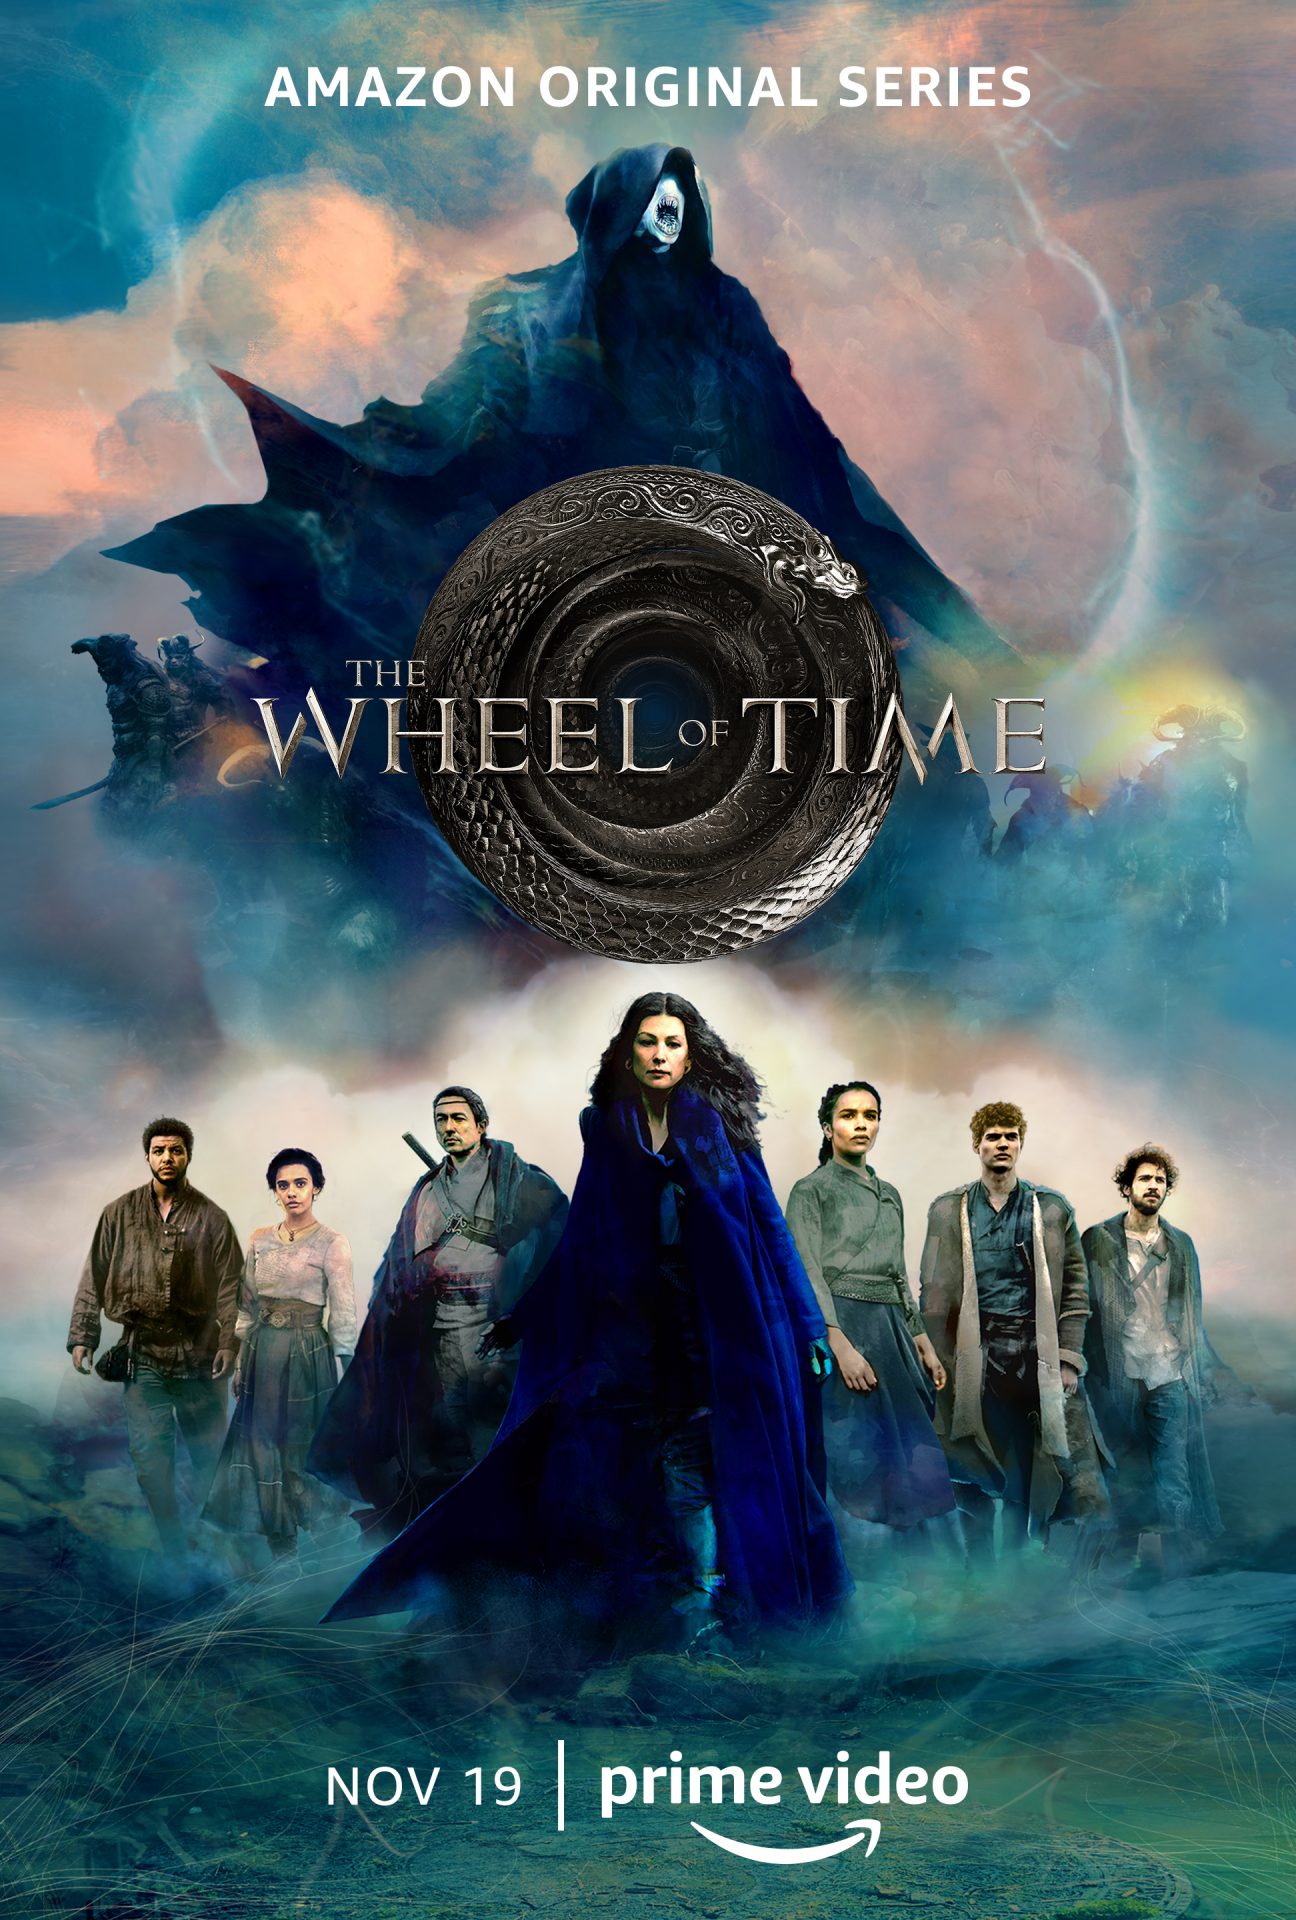 The Wheel of Time season 1 key art shows a group of characters and the logo